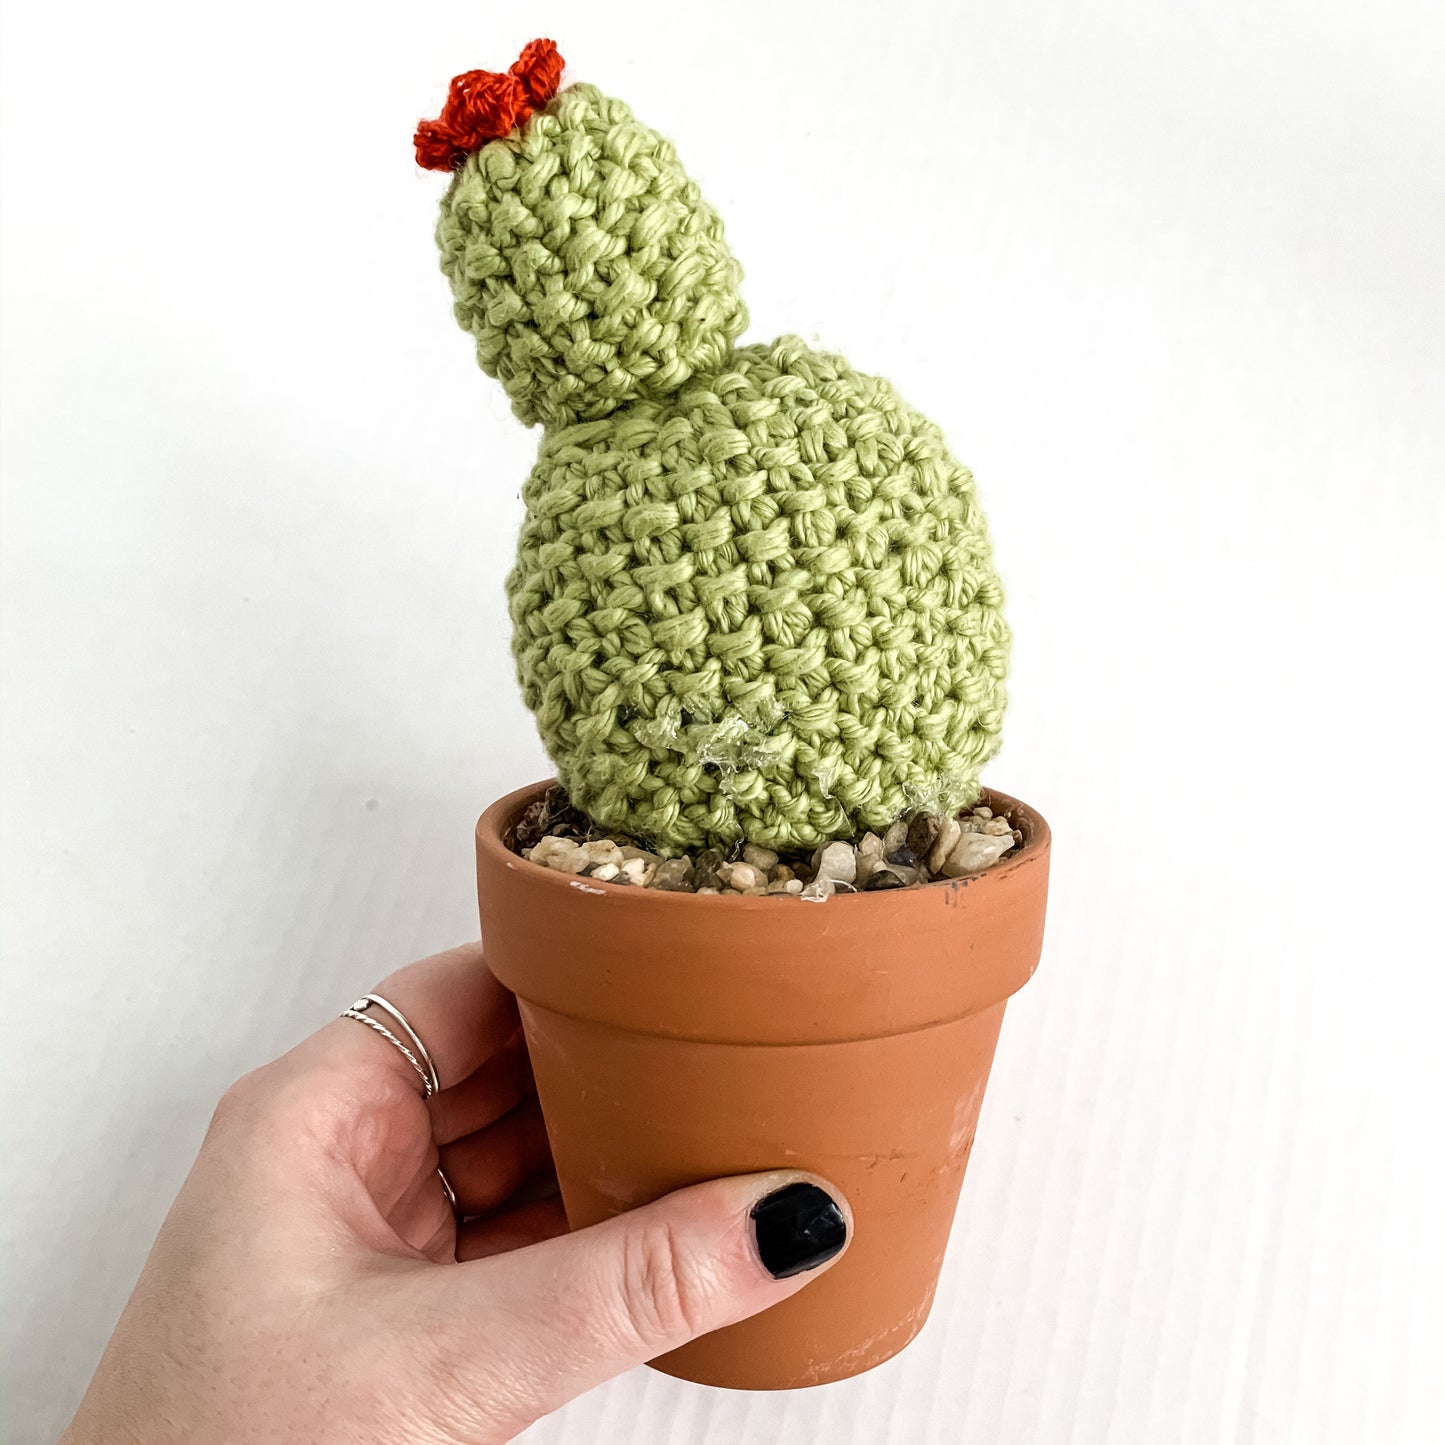 Knit Cactus // Prickly Pear, Knit Cactus Plant with Flower Planted in Terracotta Pot // Boho Home Decor// Home Office Decor